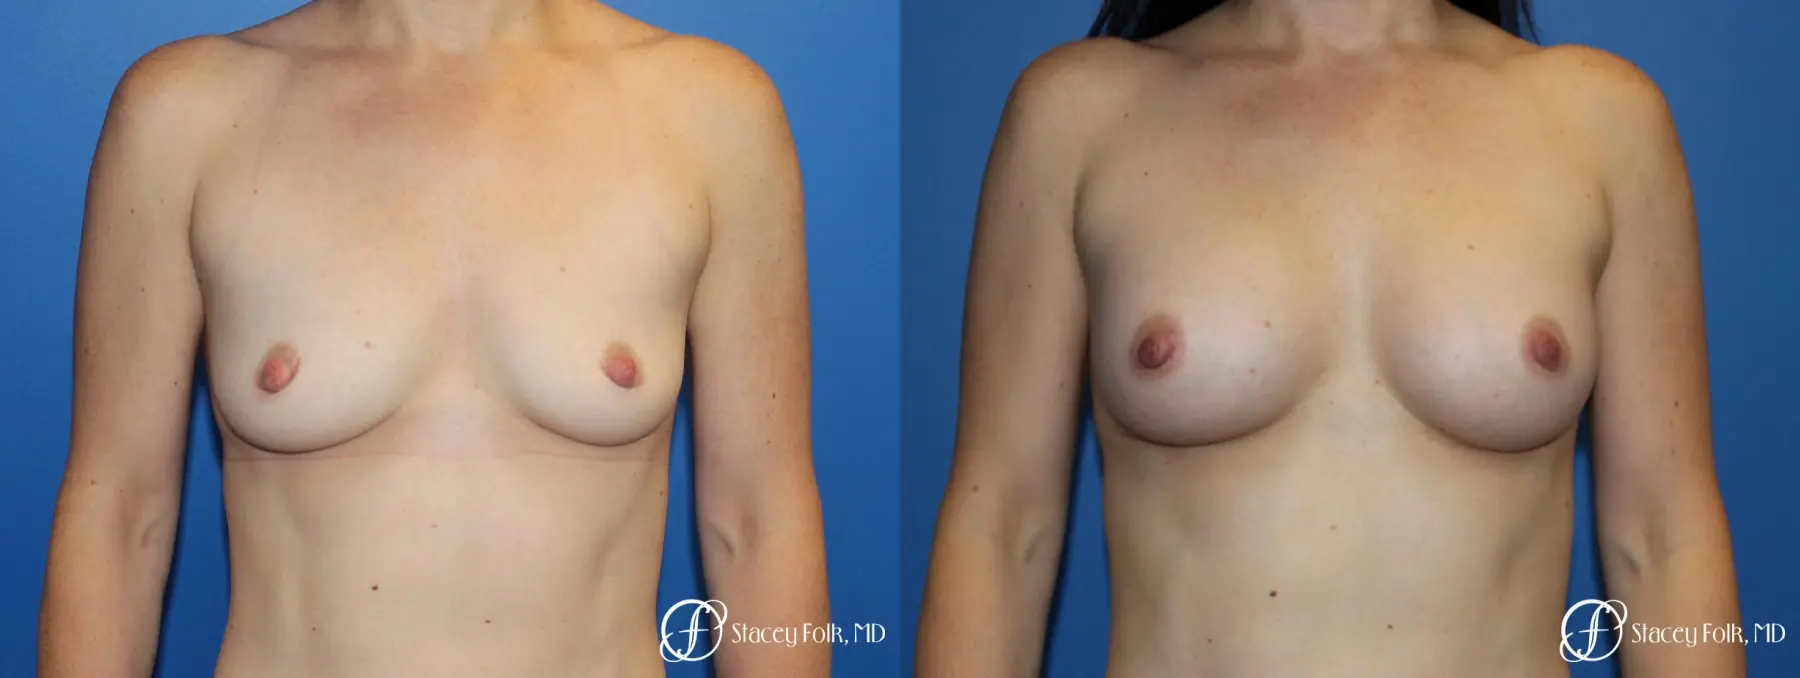 Breast augmentation with Natrelle Inspira breast implants - Before and After